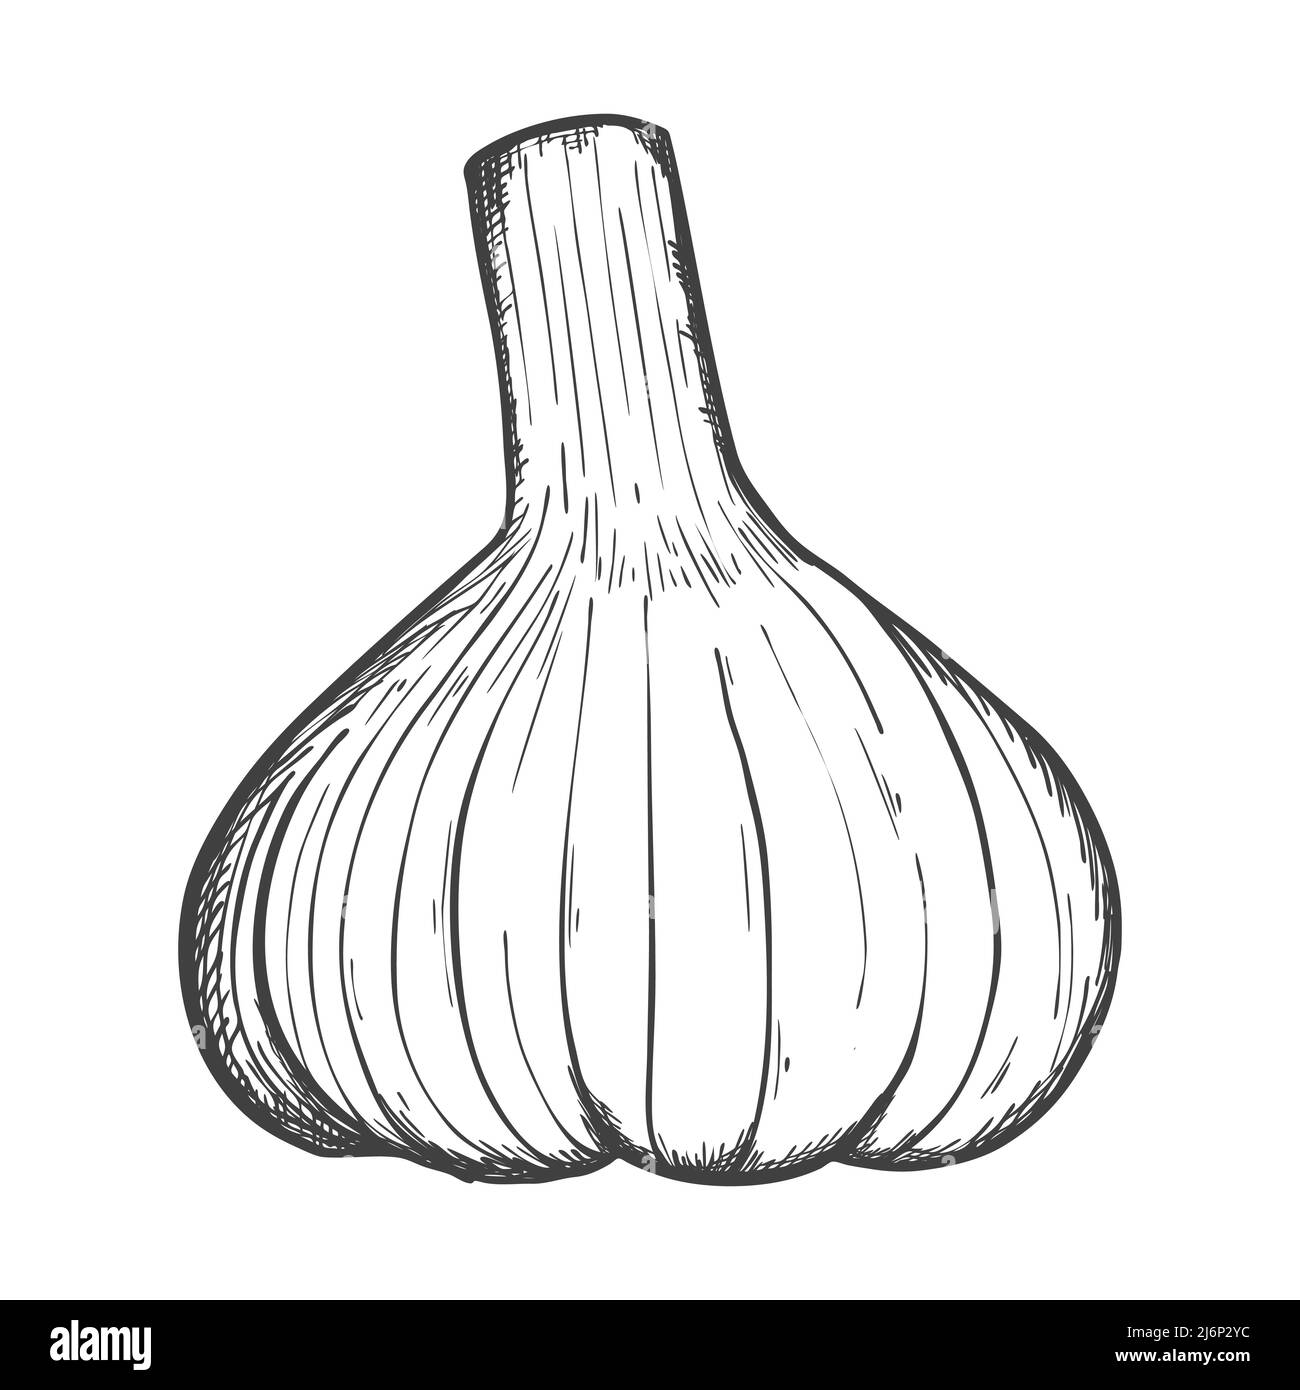 Sketch of a garlic head. Food sketching. Whole garlic in the skin. For menu design, recipes, and cooking magazines. Black and white vector illustratio Stock Vector